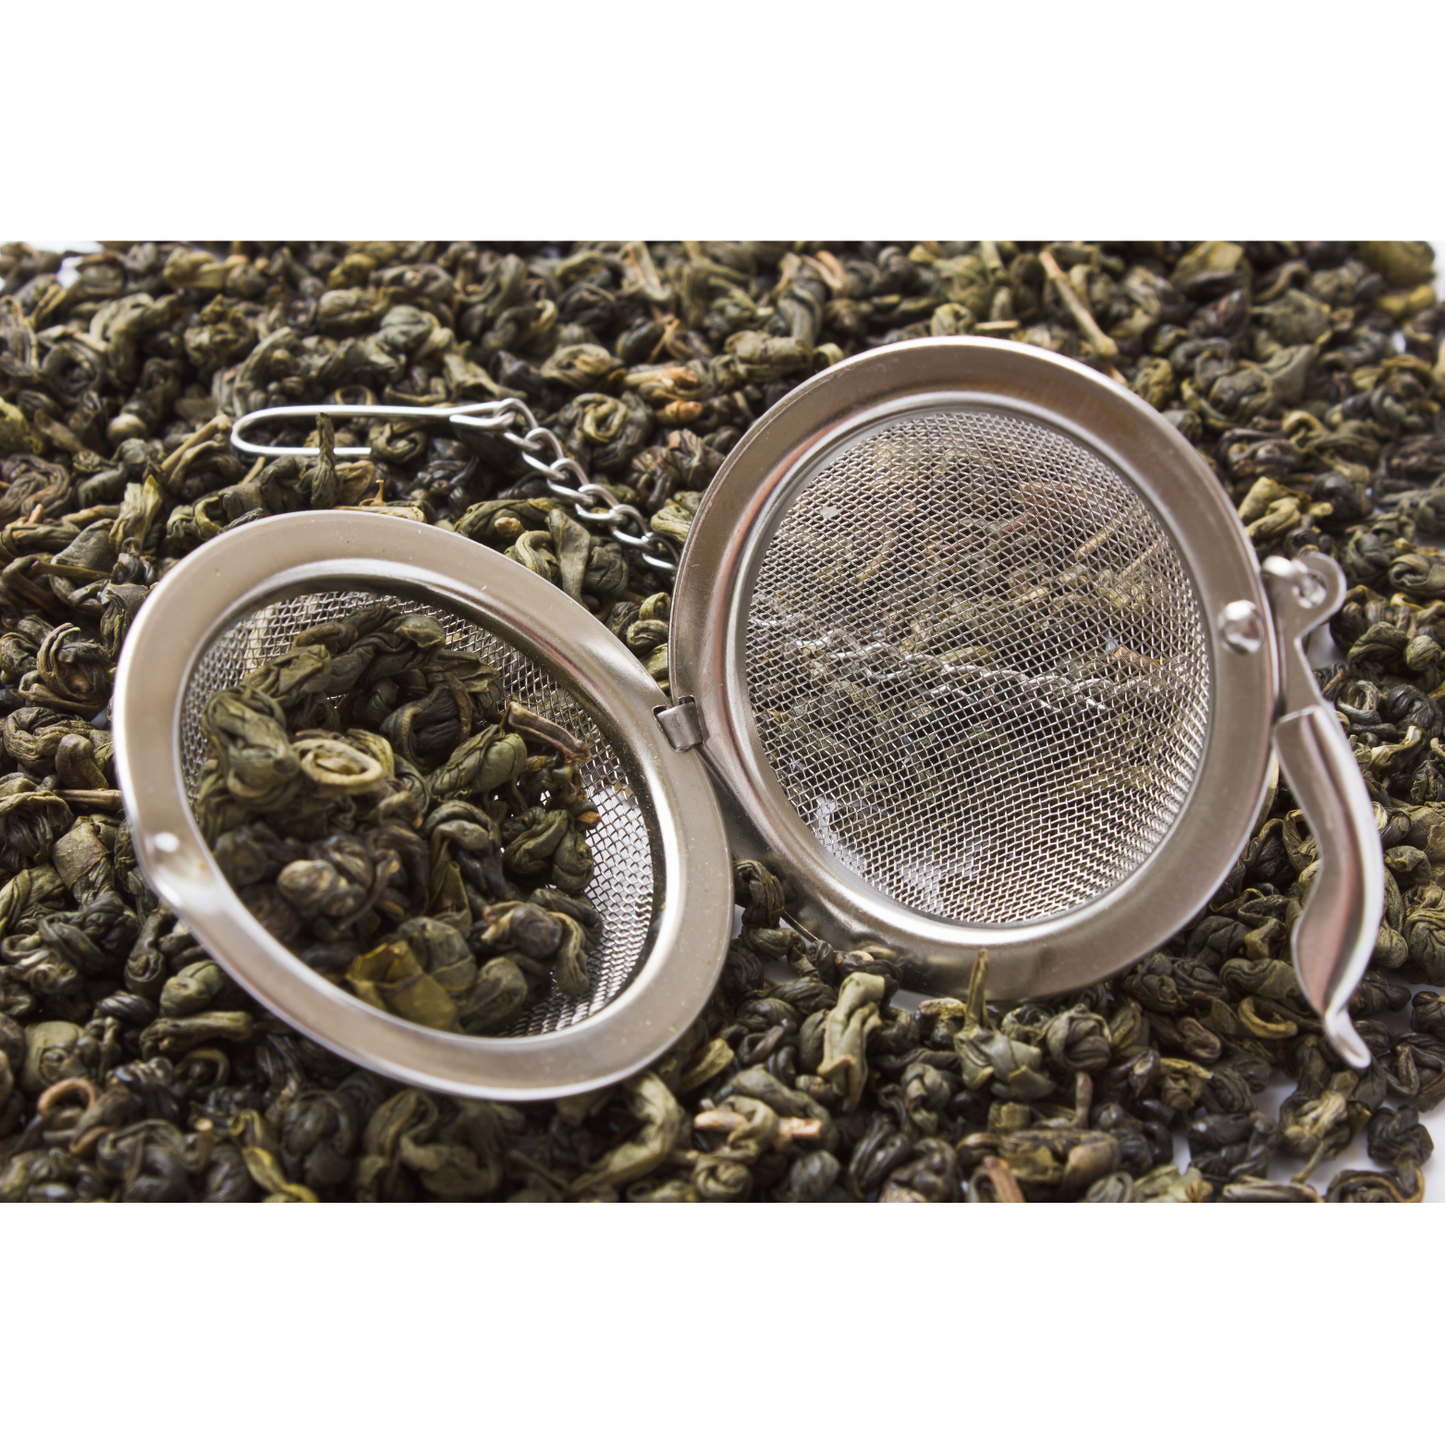 Tea Infuser Mesh Ball for Brewing Loose Leaf Tea 2." with FREE Wooden Spoon!!